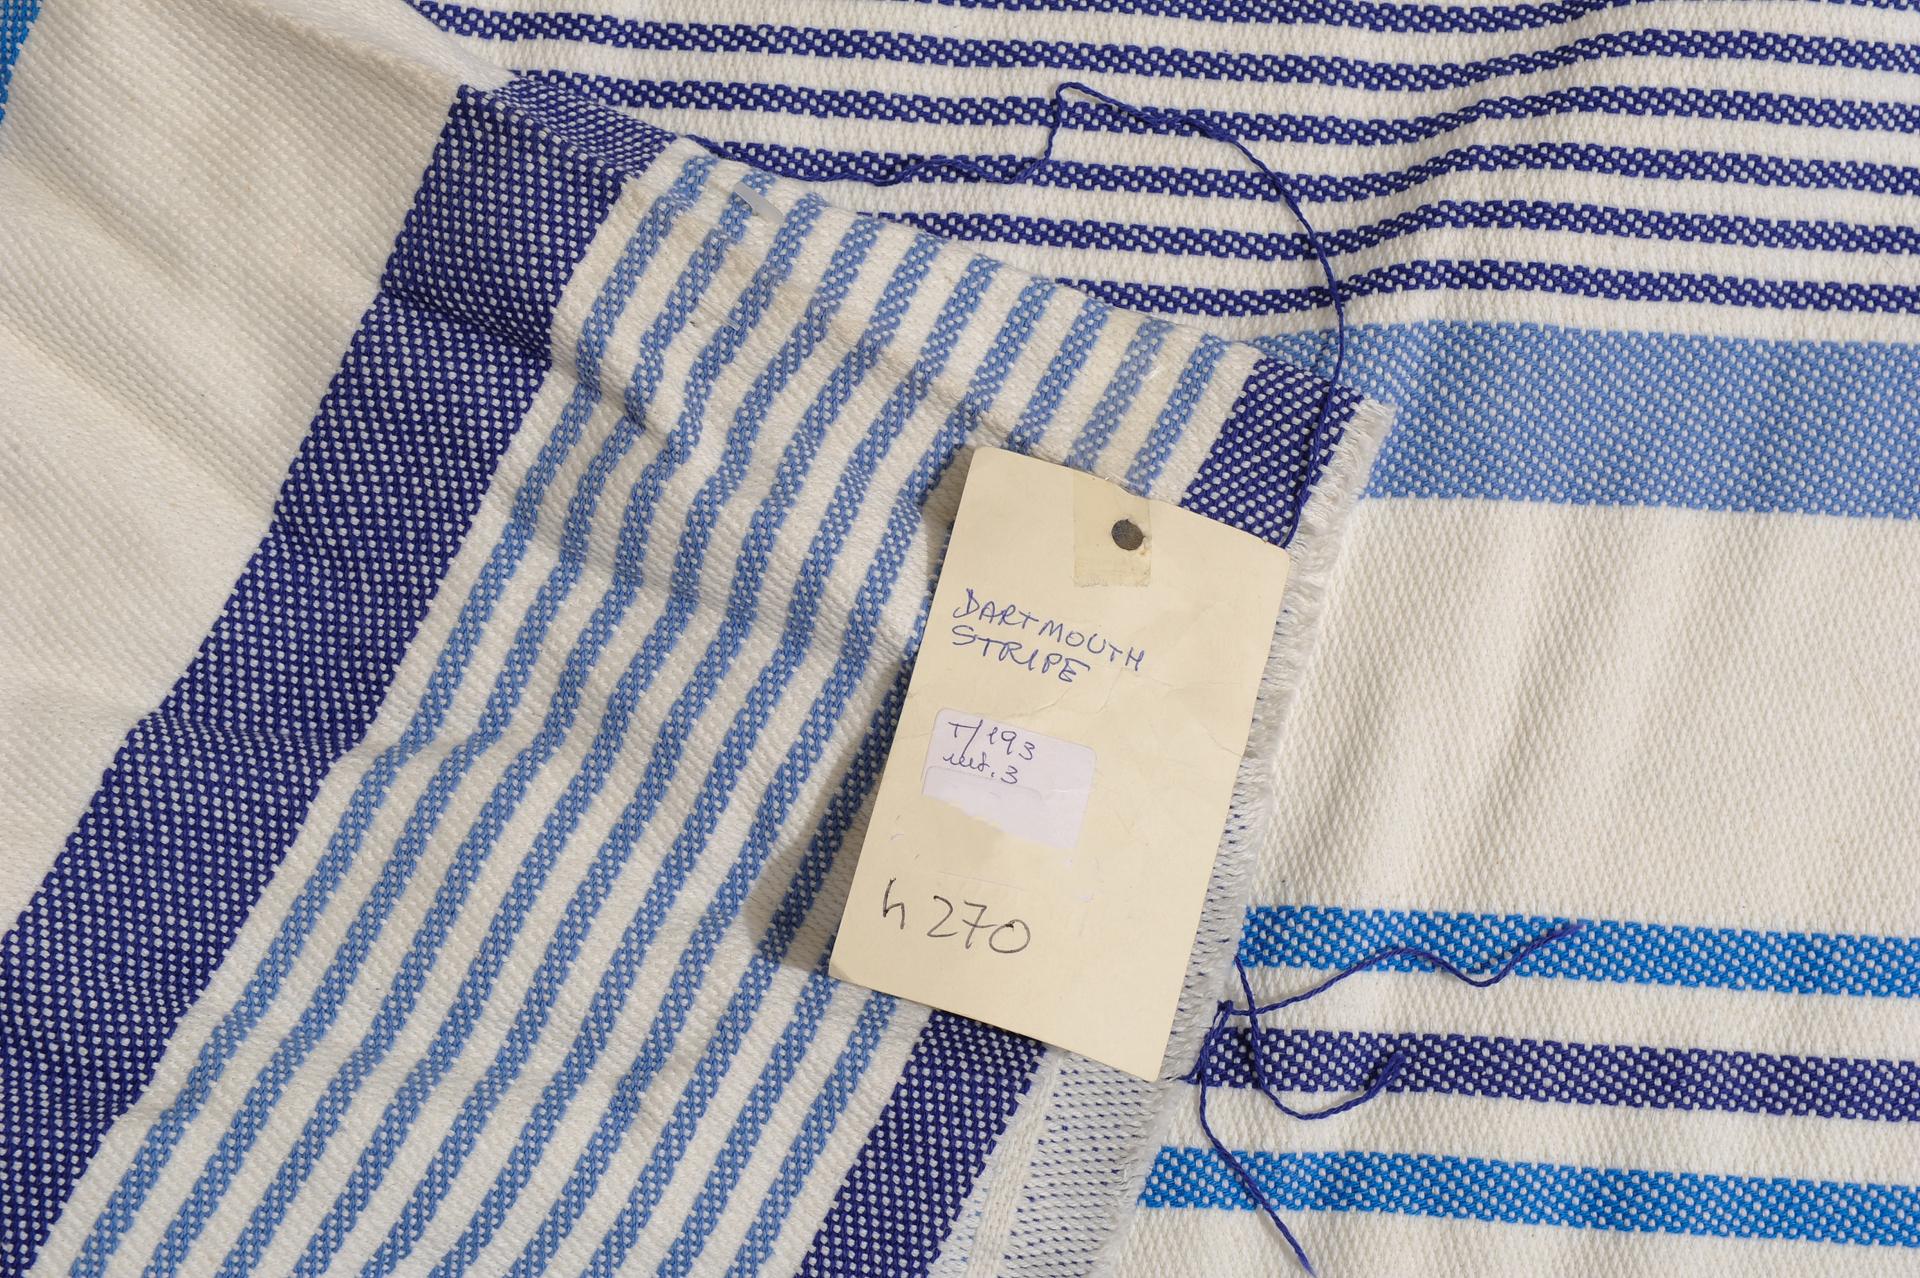 A navy striped wide-width fabric, ideal for bed or for curtains, by the best: Mulberry.
You can make what You wish.